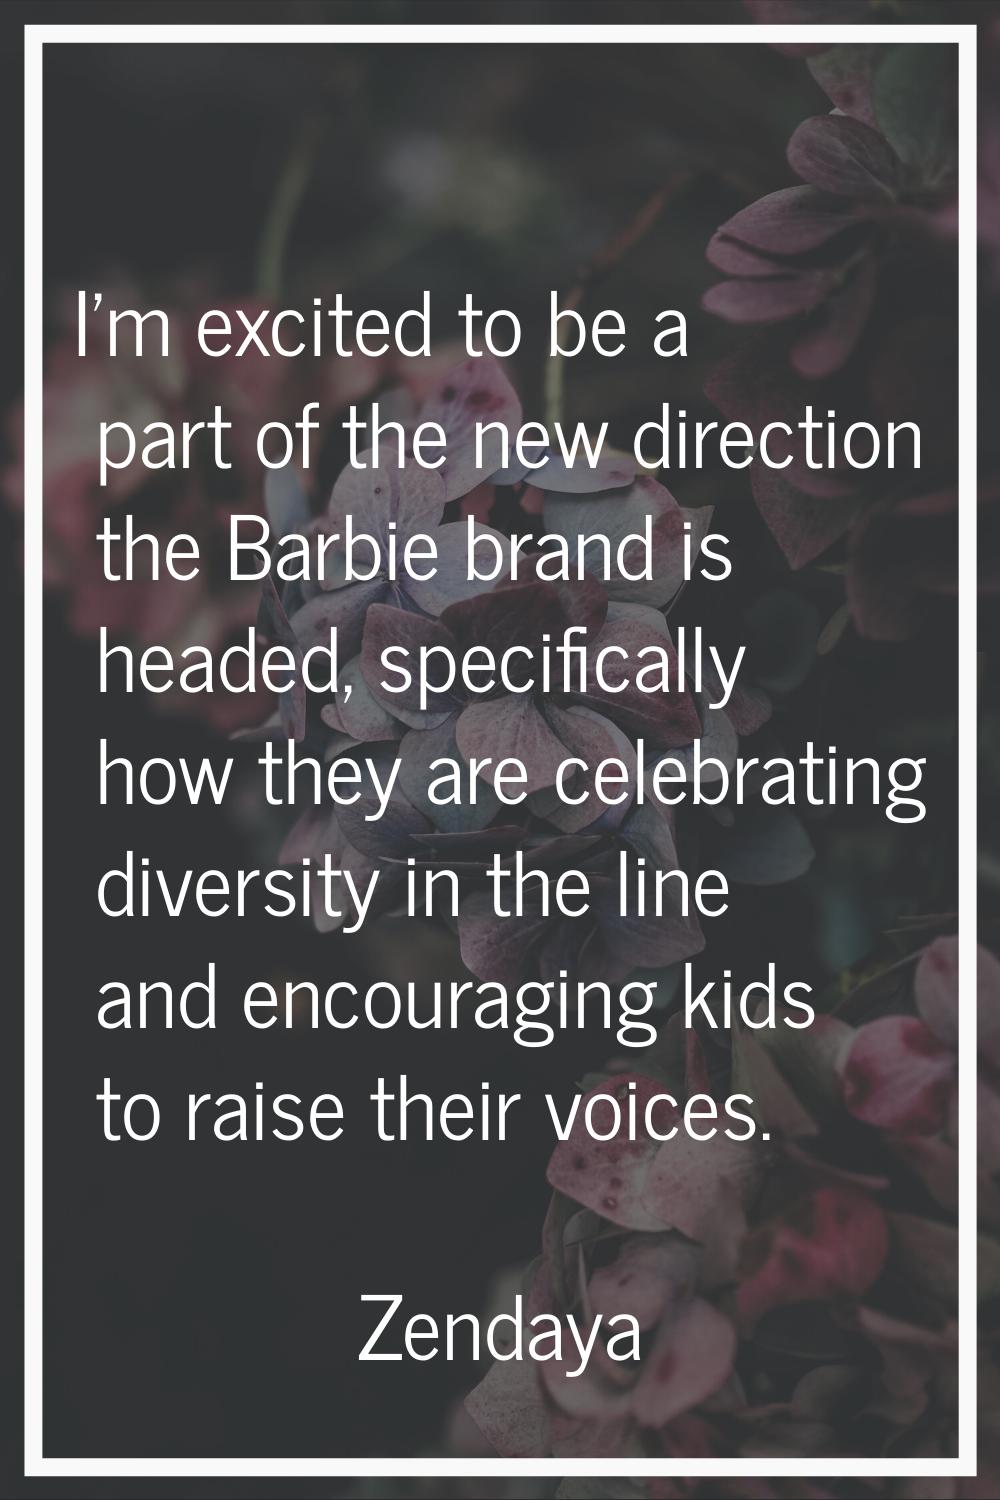 I'm excited to be a part of the new direction the Barbie brand is headed, specifically how they are